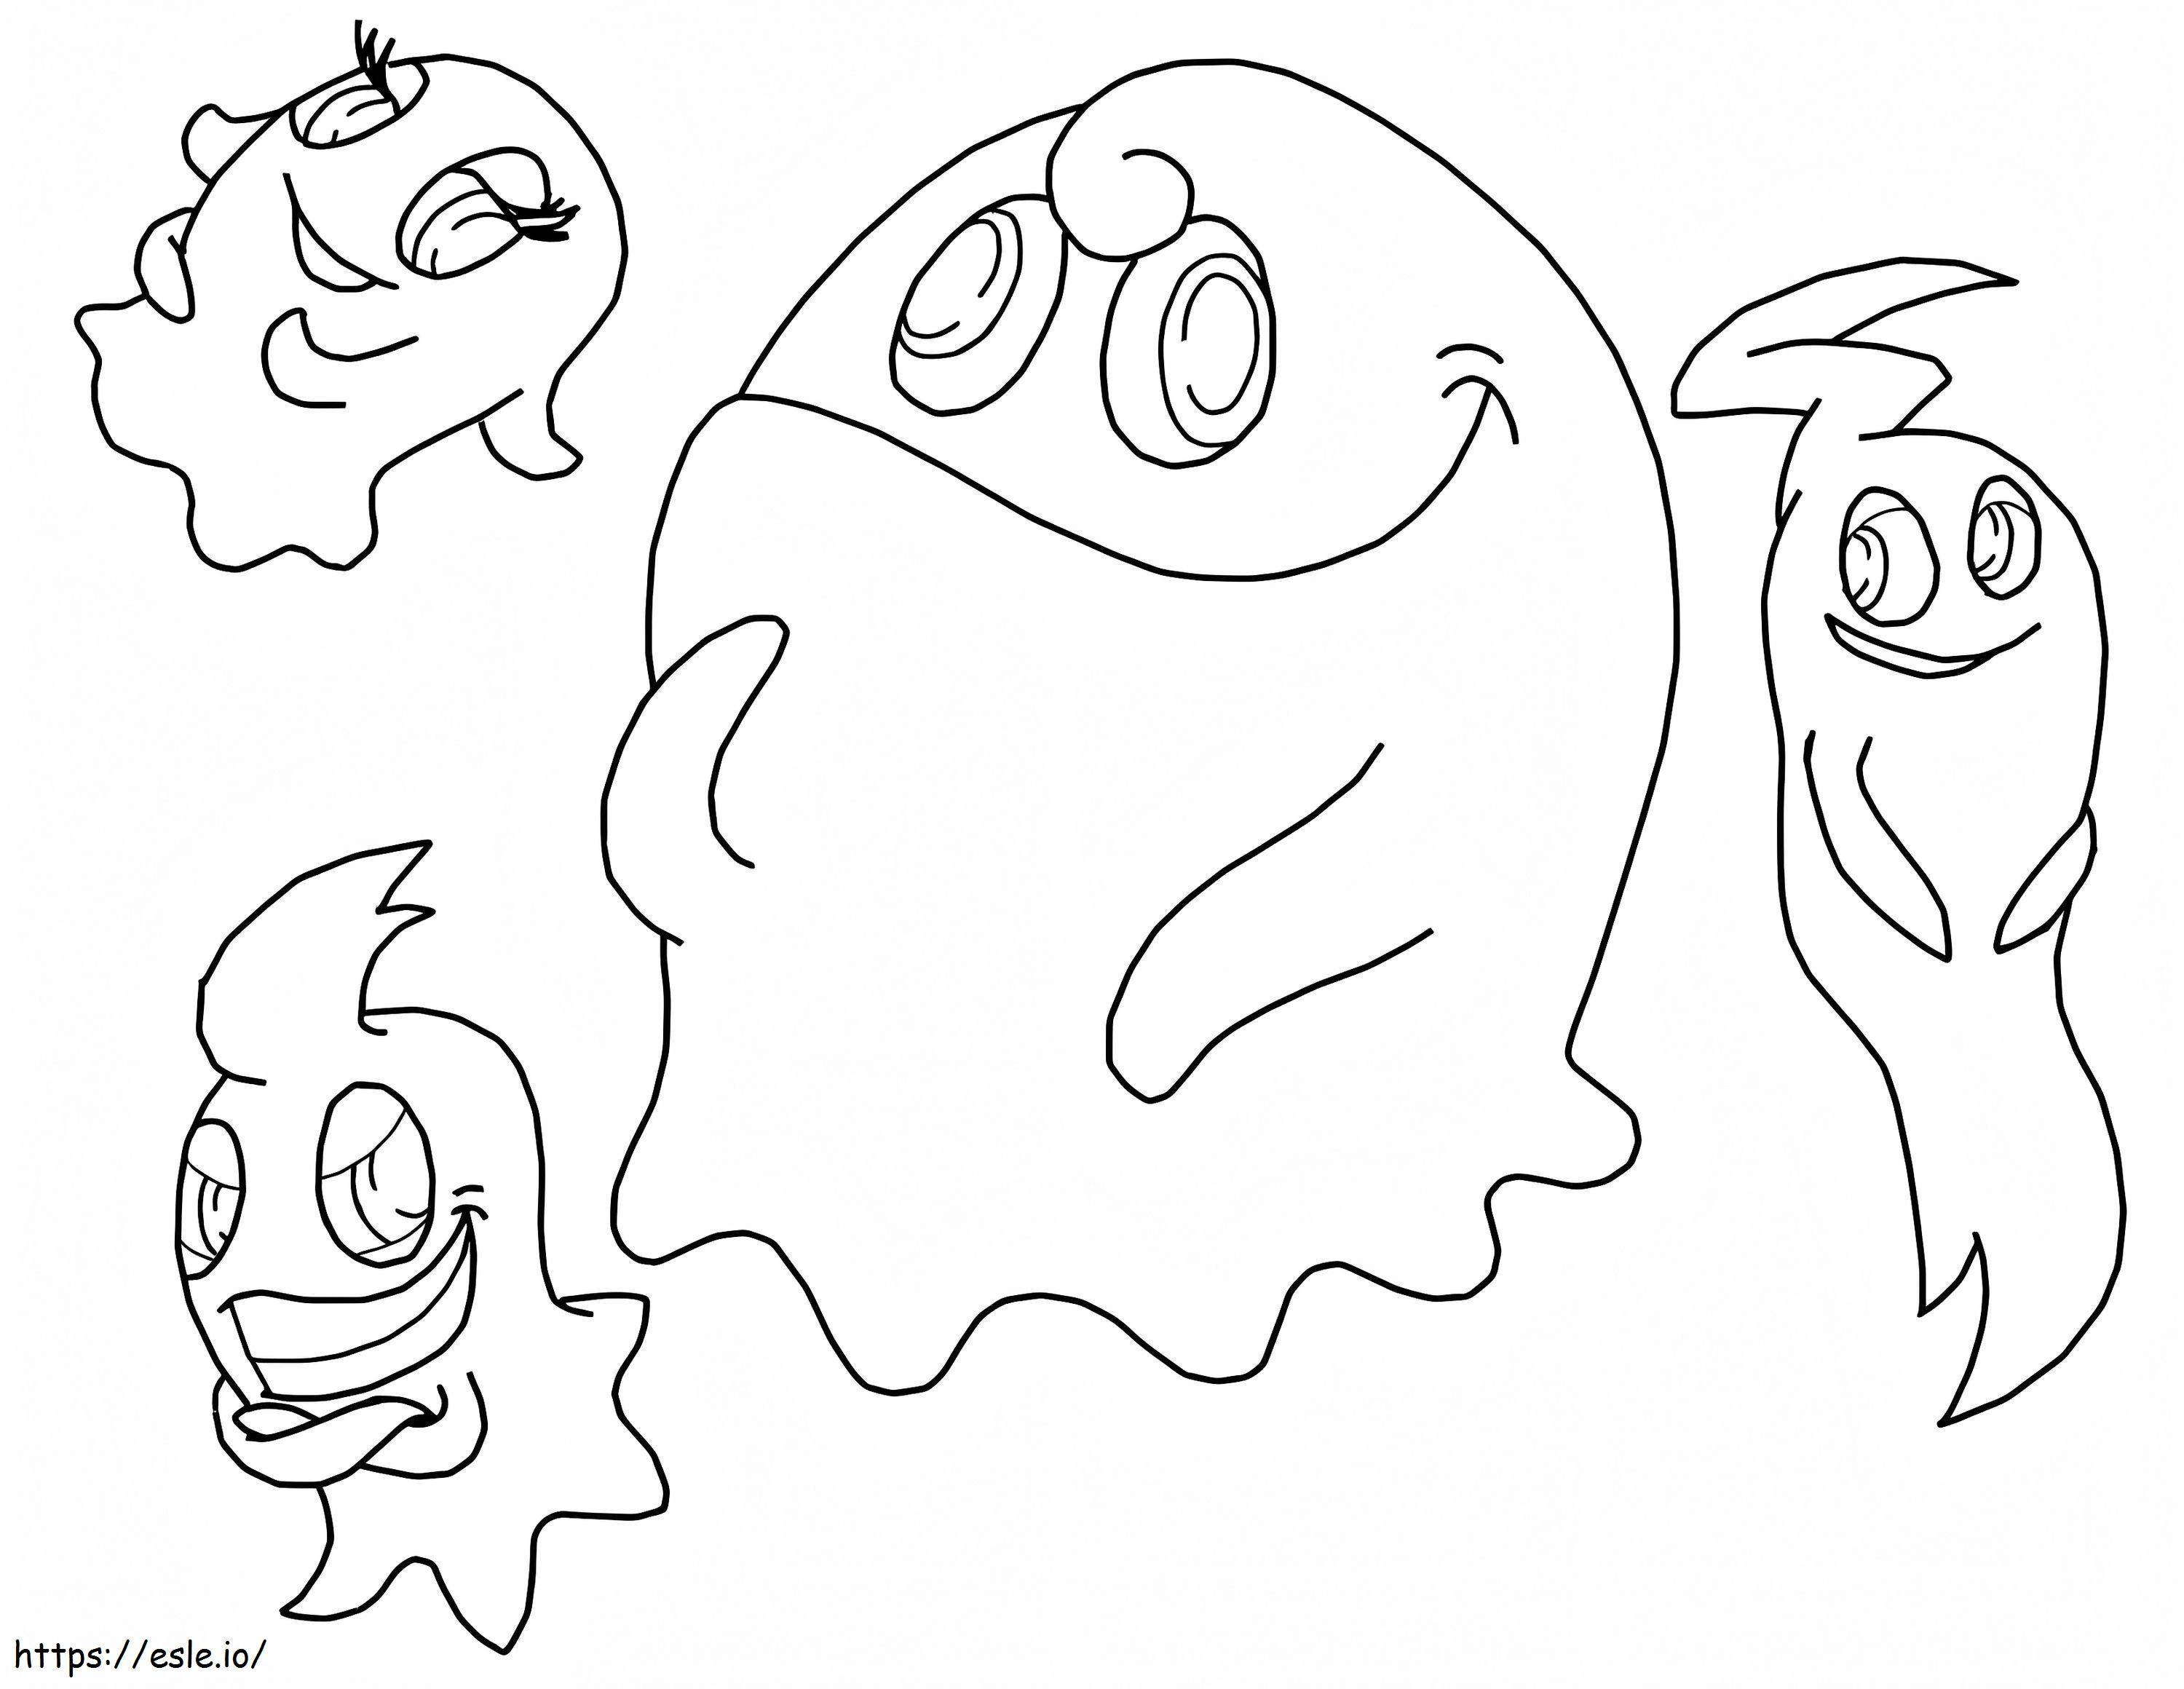 Four Ghosts In Pacman coloring page